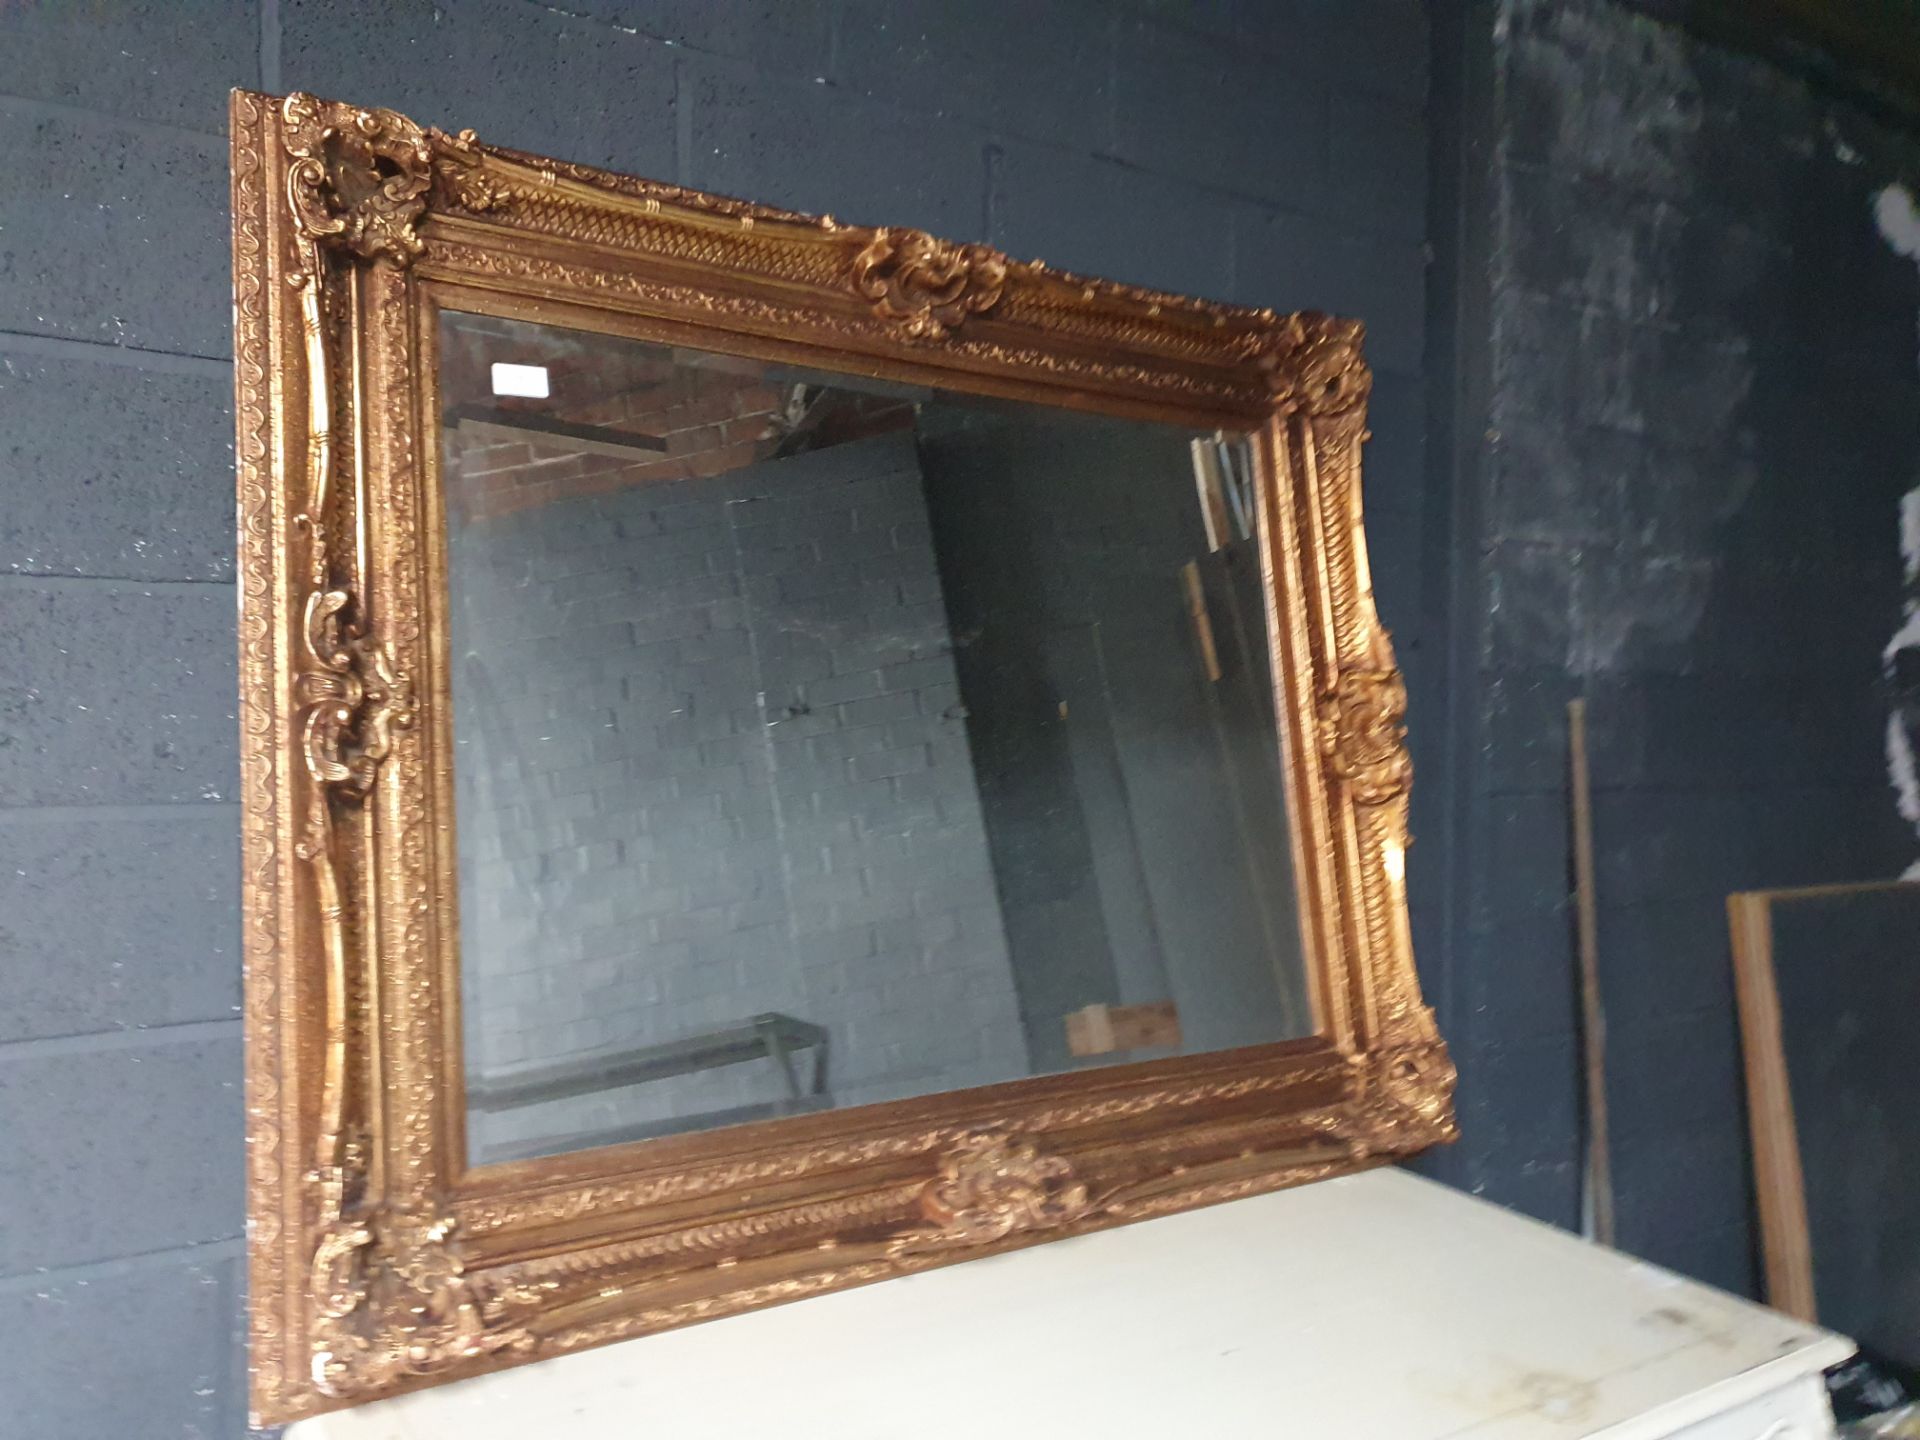 Large Ornate Wall Mirror - Image 2 of 3